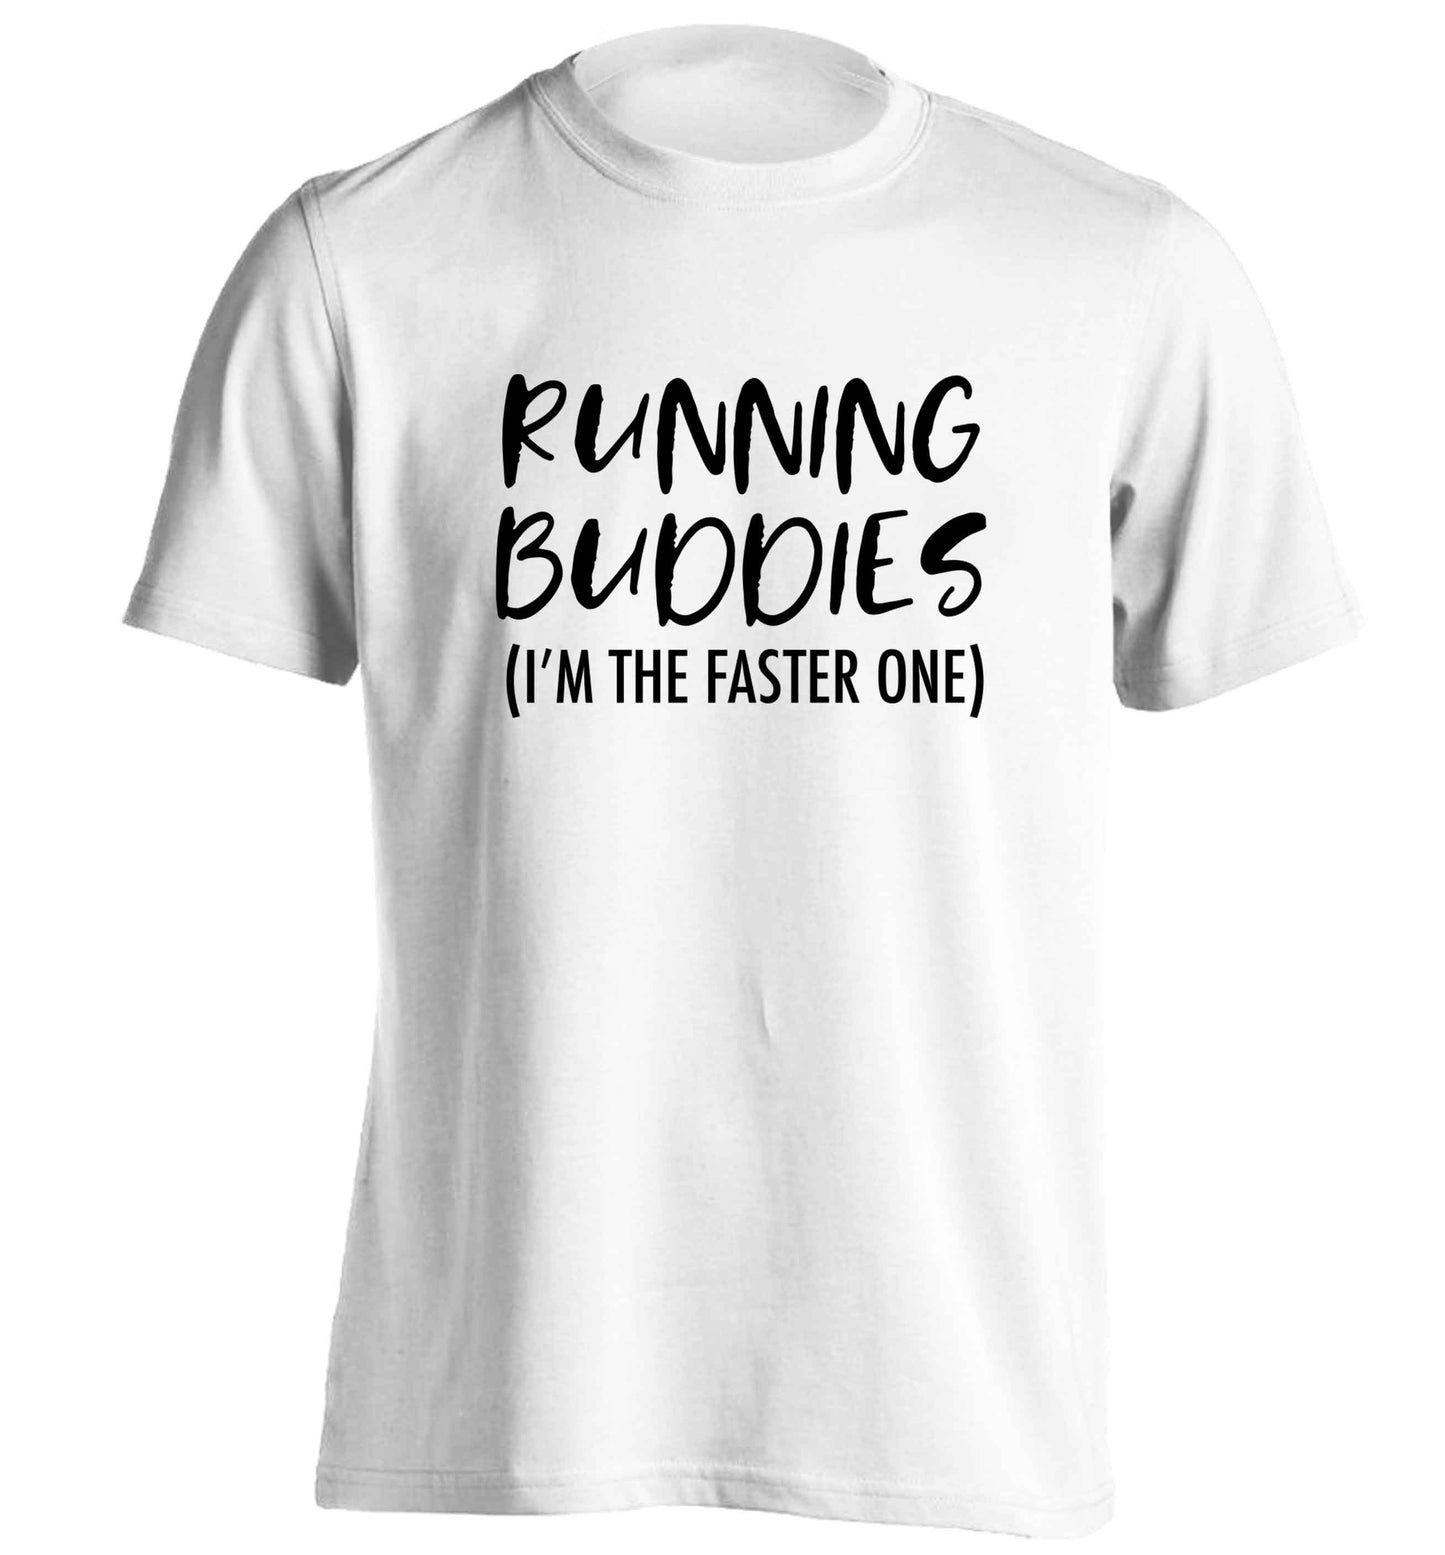 Running buddies (I'm the faster one) adults unisex white Tshirt 2XL